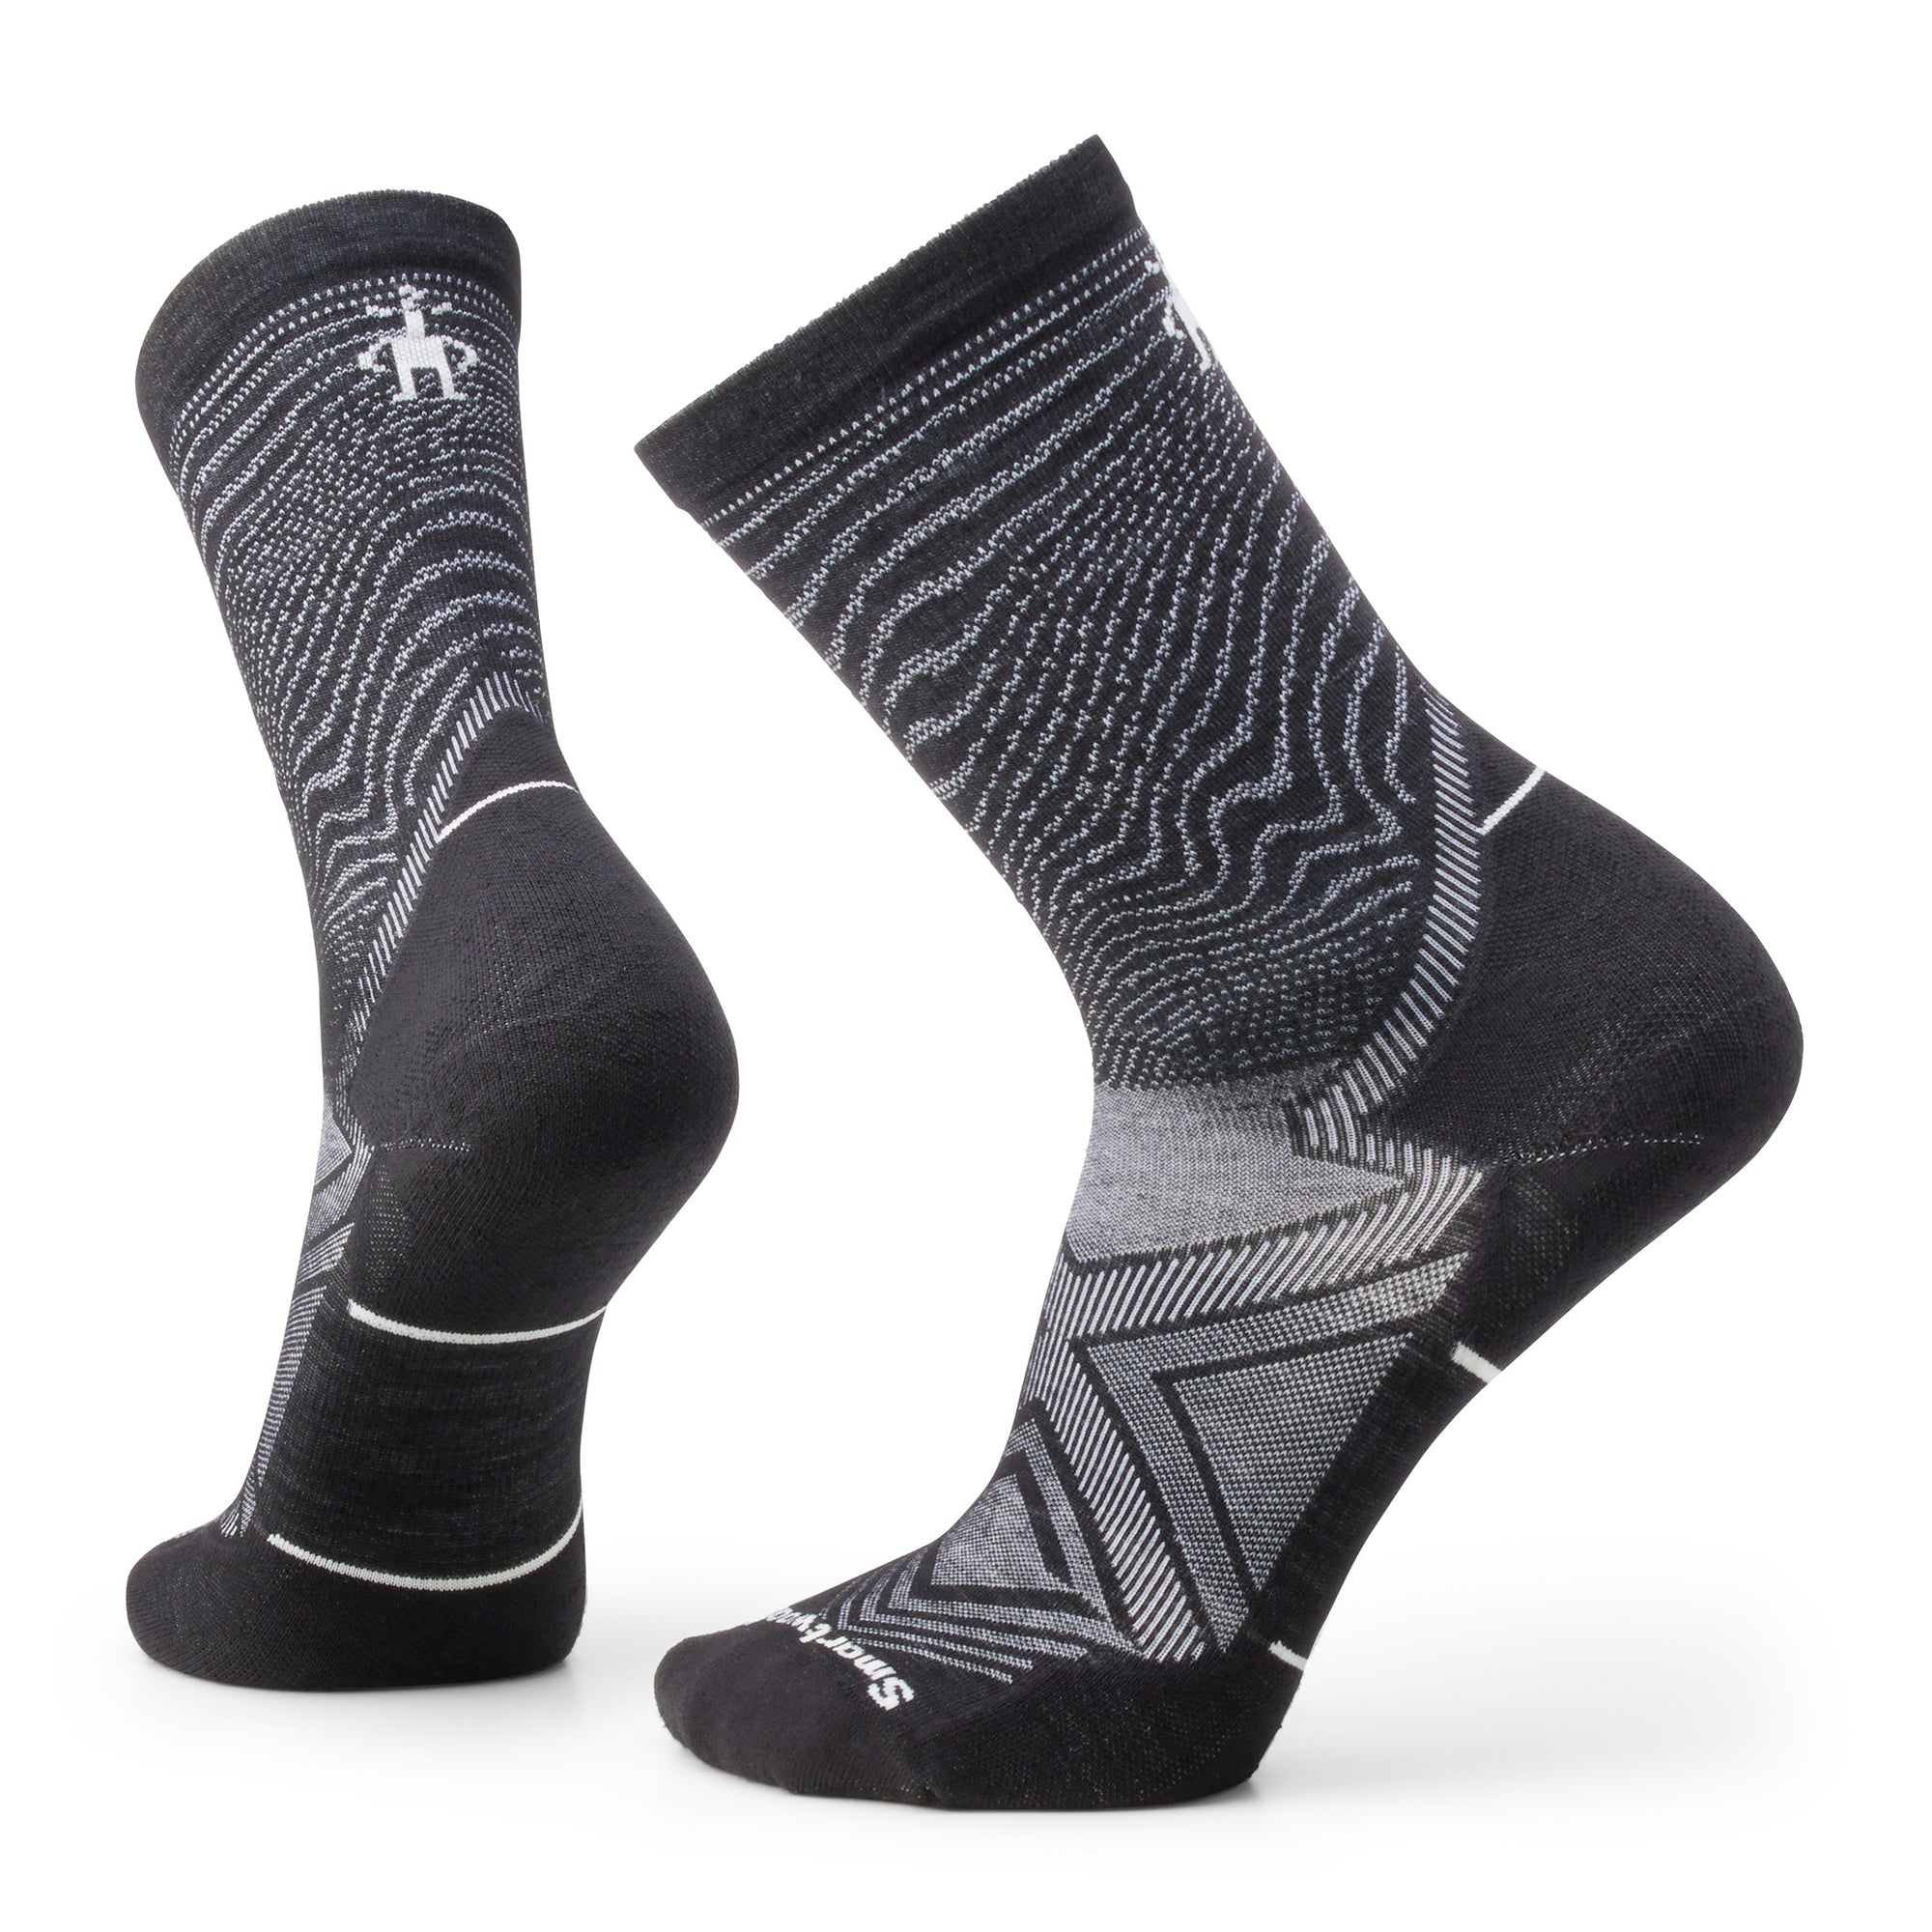 SMARTWOOL TRAIL SOCK WITH TARGETED CUSHION - UNISEX